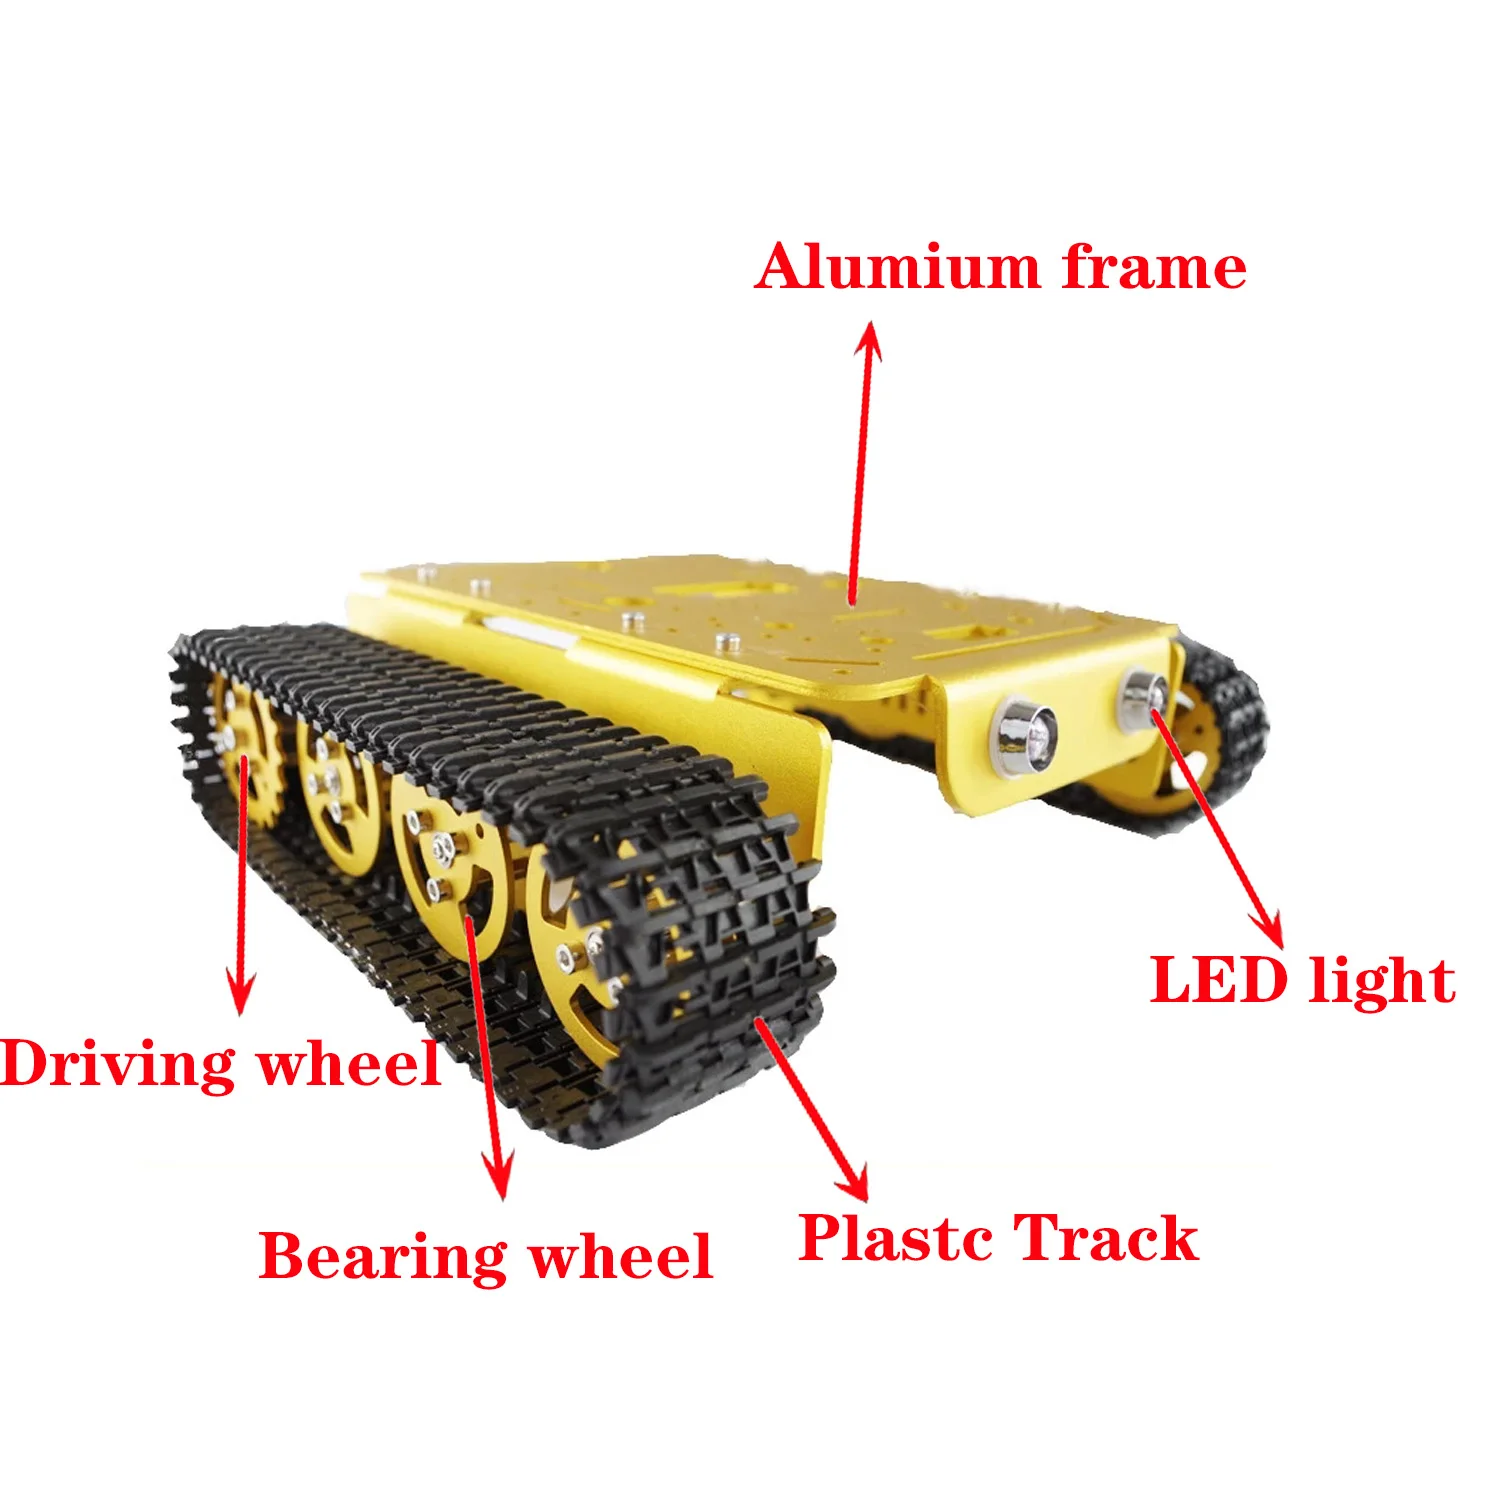 DOIT TD200 Metal Tank Chassis Robot Model Intelligent Car with Solid Structure 2 Motor Plastic Tracks Electronic Contest enlarge